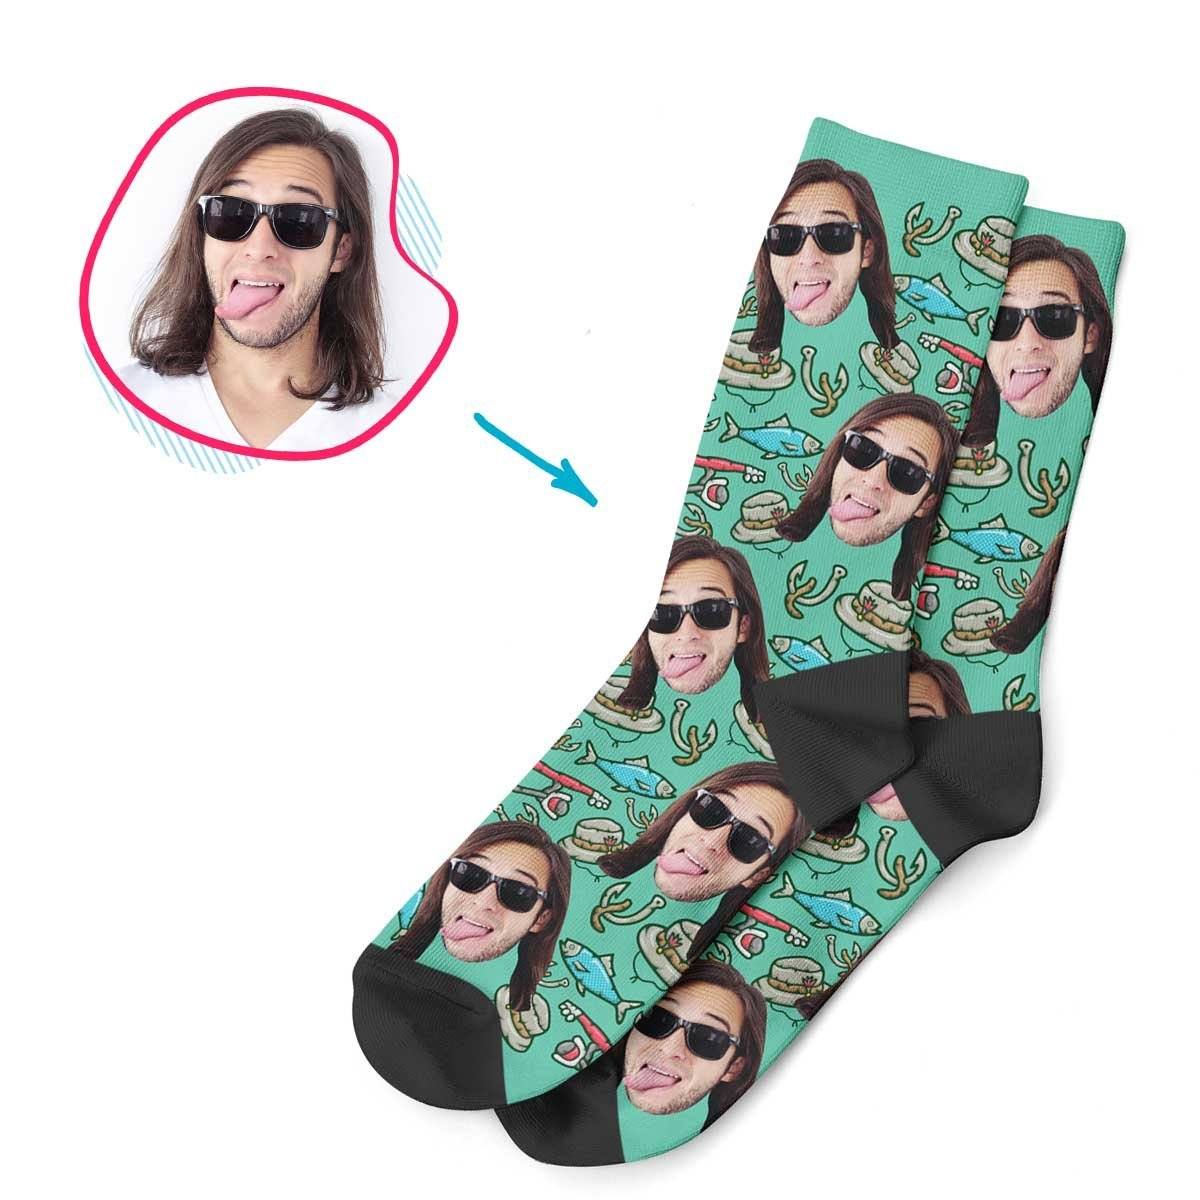 Mint Fishing personalized socks with photo of face printed on them